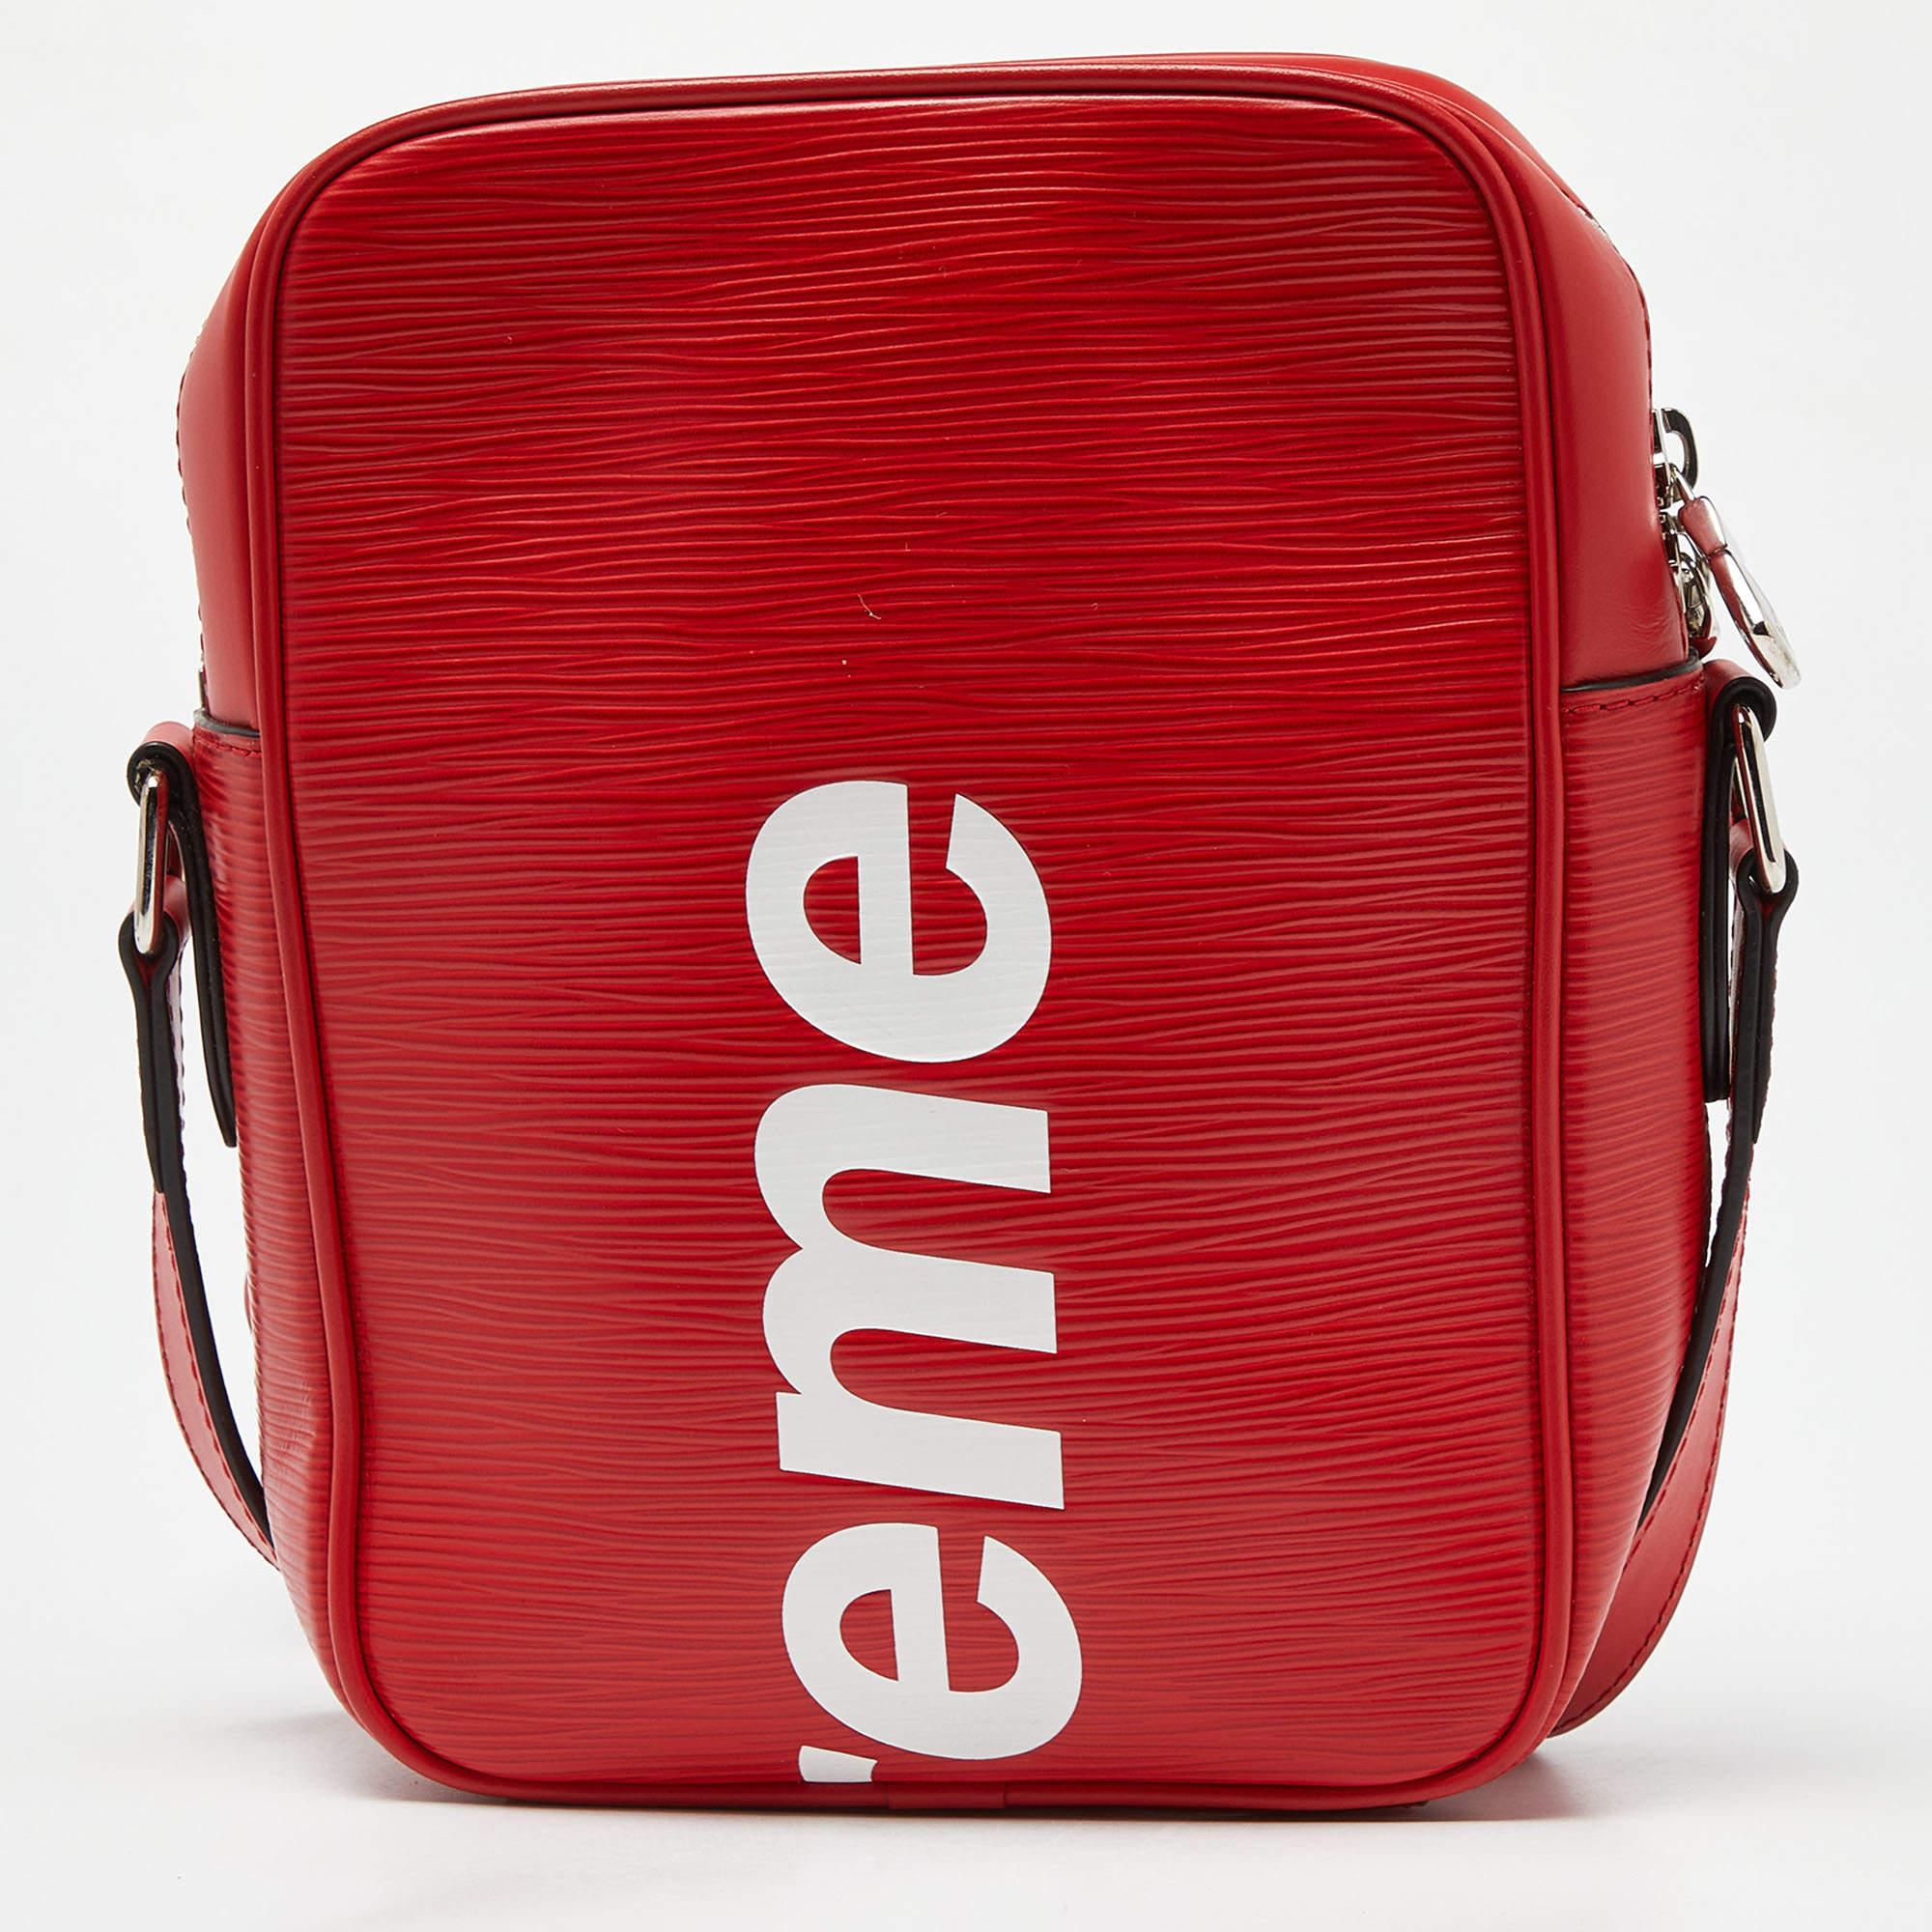 Louis Vuitton's collaboration with NYC streetwear brand, Supreme, was such a fresh merge that, to this day, the designs from the line are sought-after. This LV Supreme Danube PM bag from the collaboration is presented in red Epi leather and adorned